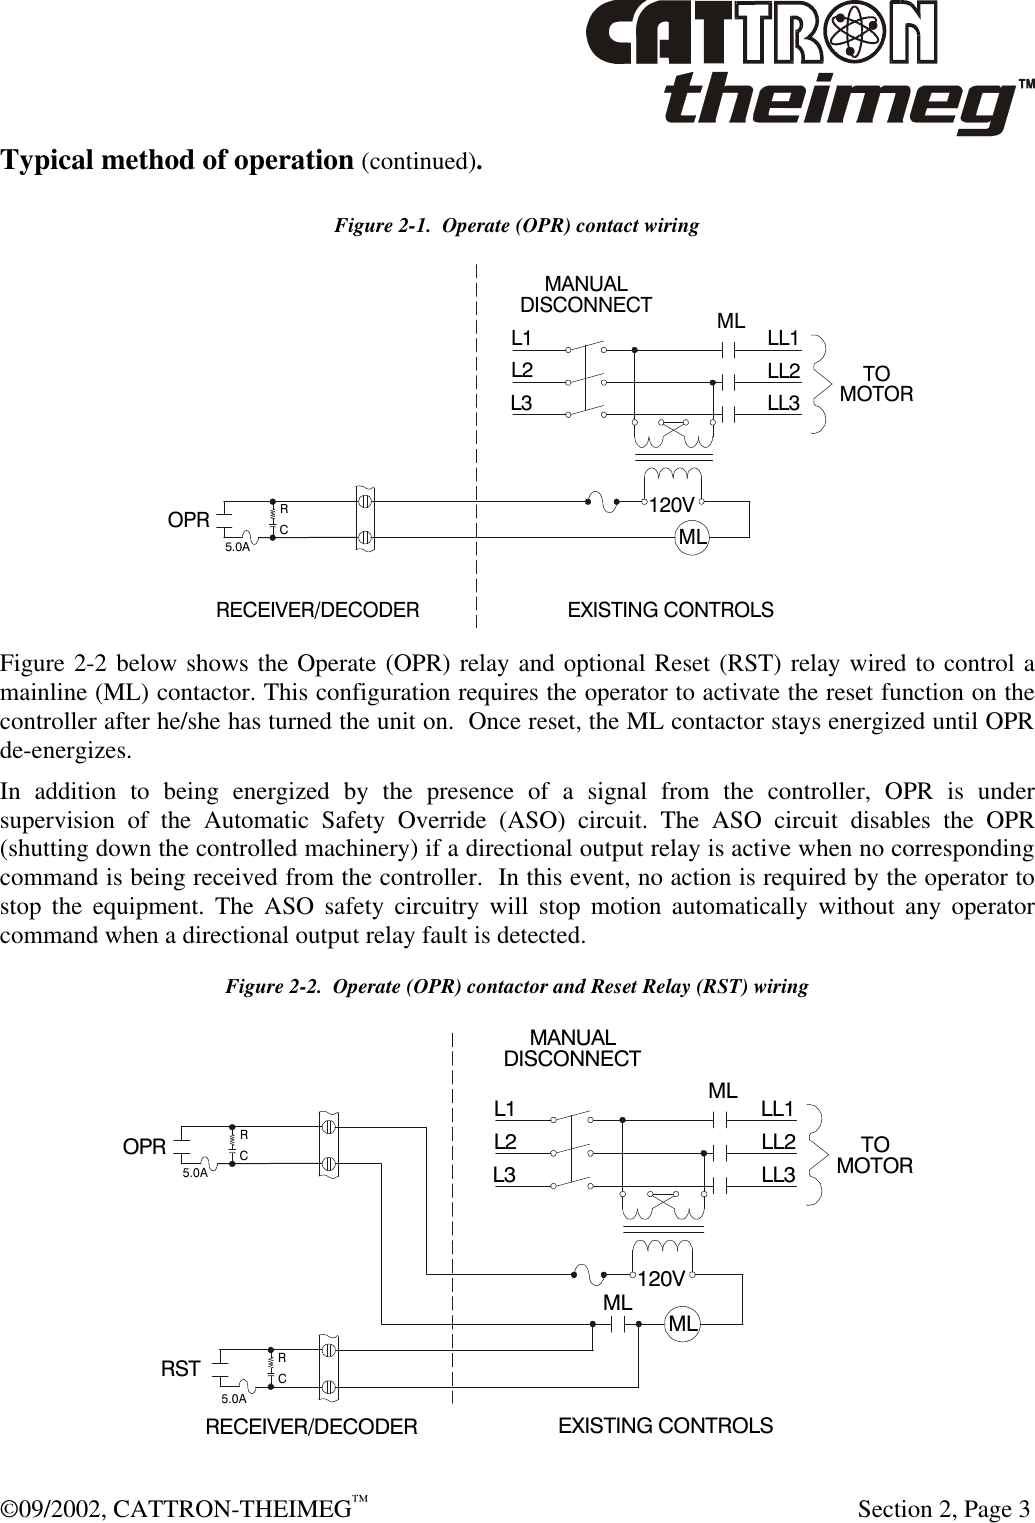  ©09/2002, CATTRON-THEIMEG™   Section 2, Page 3 Typical method of operation (continued).  Figure 2-1.  Operate (OPR) contact wiring  Figure 2-2 below shows the Operate (OPR) relay and optional Reset (RST) relay wired to control a mainline (ML) contactor. This configuration requires the operator to activate the reset function on the controller after he/she has turned the unit on.  Once reset, the ML contactor stays energized until OPR de-energizes.  In addition to being energized by the presence of a signal from the controller, OPR is under supervision of the Automatic Safety Override (ASO) circuit. The ASO circuit disables the OPR (shutting down the controlled machinery) if a directional output relay is active when no corresponding command is being received from the controller.  In this event, no action is required by the operator to stop the equipment. The ASO safety circuitry will stop motion automatically without any operator command when a directional output relay fault is detected. Figure 2-2.  Operate (OPR) contactor and Reset Relay (RST) wiring  OPR120VRSTRRCC5.0A5.0AL1MLMLMLMANUALDISCONNECTL2L3 LL1LL2LL3 TOMOTORRECEIVER/DECODEREXISTING CONTROLS 120VL1 MLMLMANUALDISCONNECTL2L3 LL1LL2LL3 TOMOTORRECEIVER/DECODEREXISTING CONTROLS OPRRC5.0A